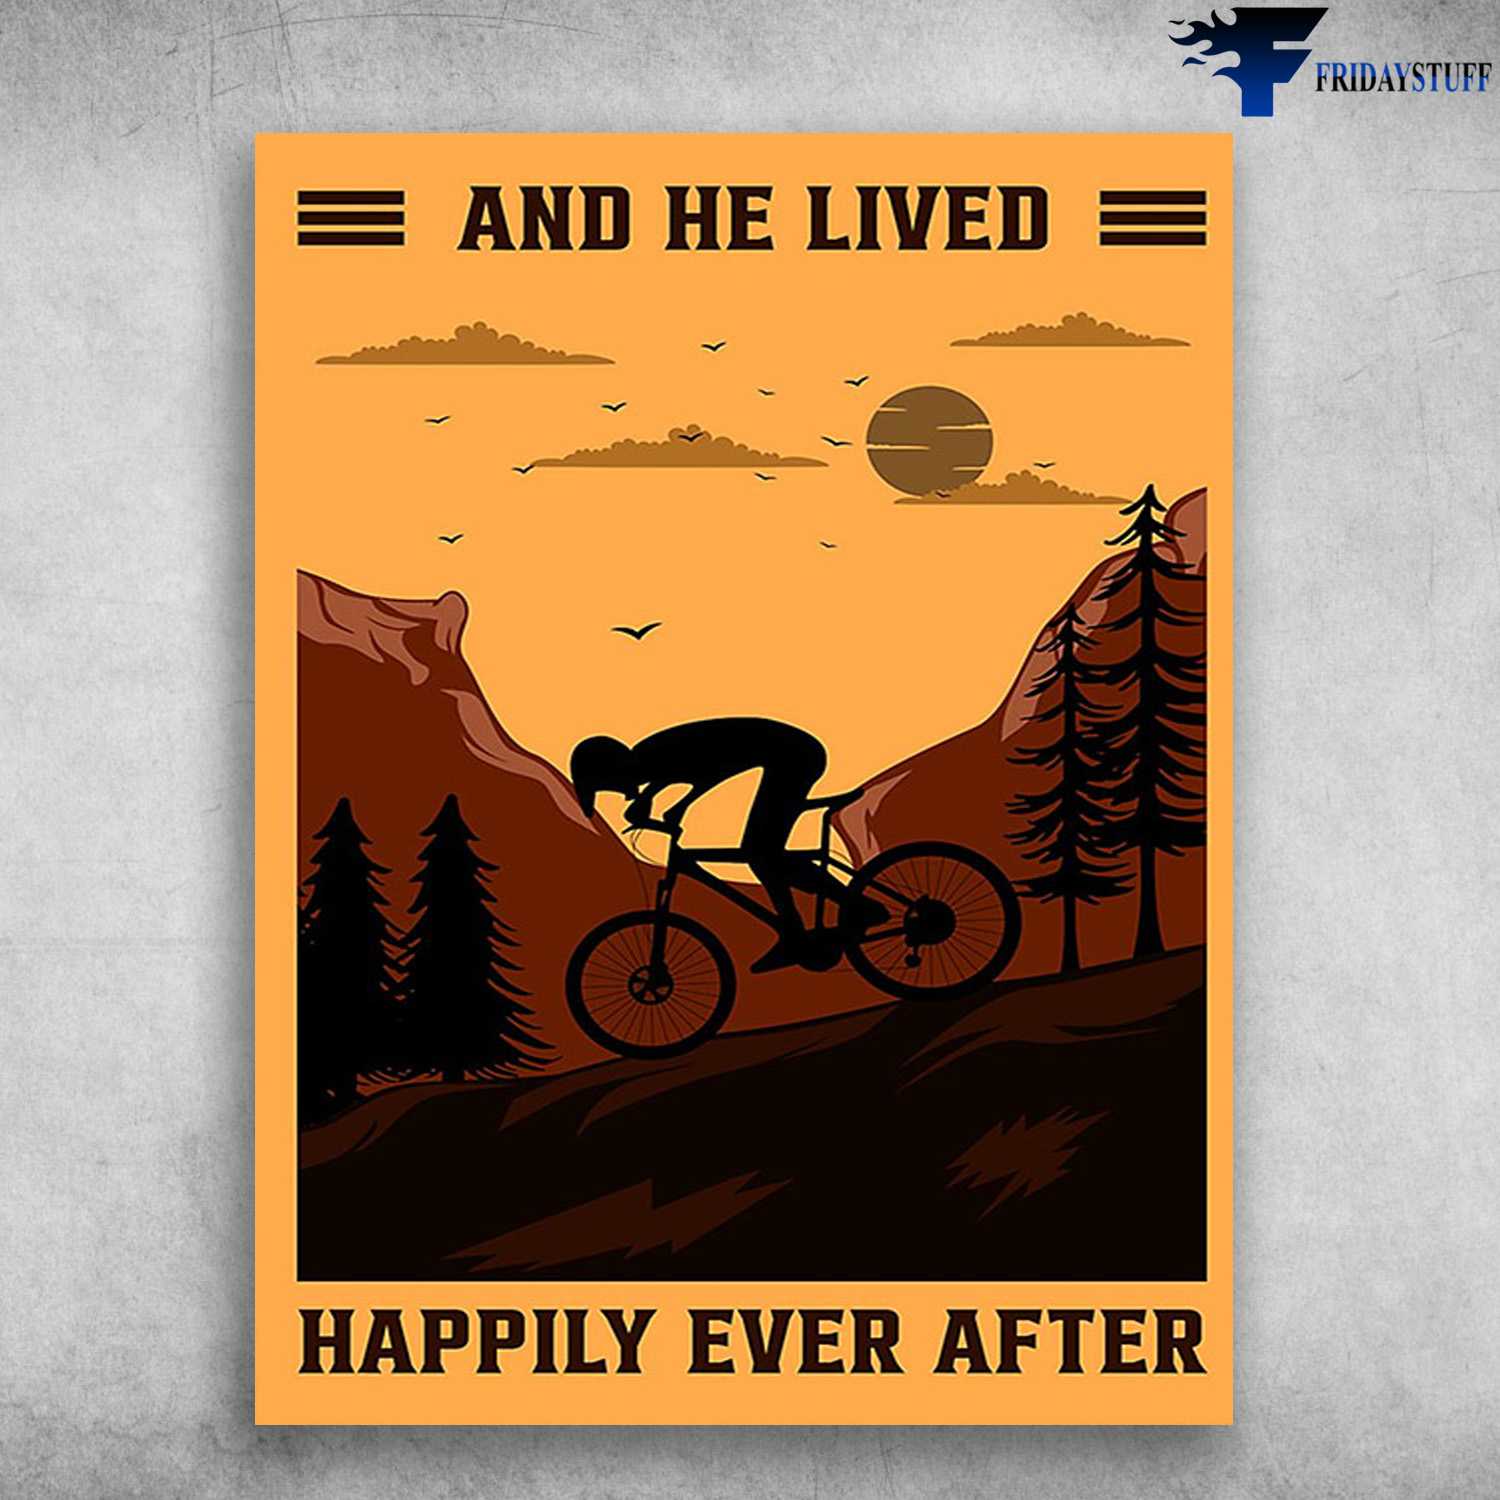 Cycling Man, Moutain Biking - And He Lived, Happily Ever After, Biker Poster